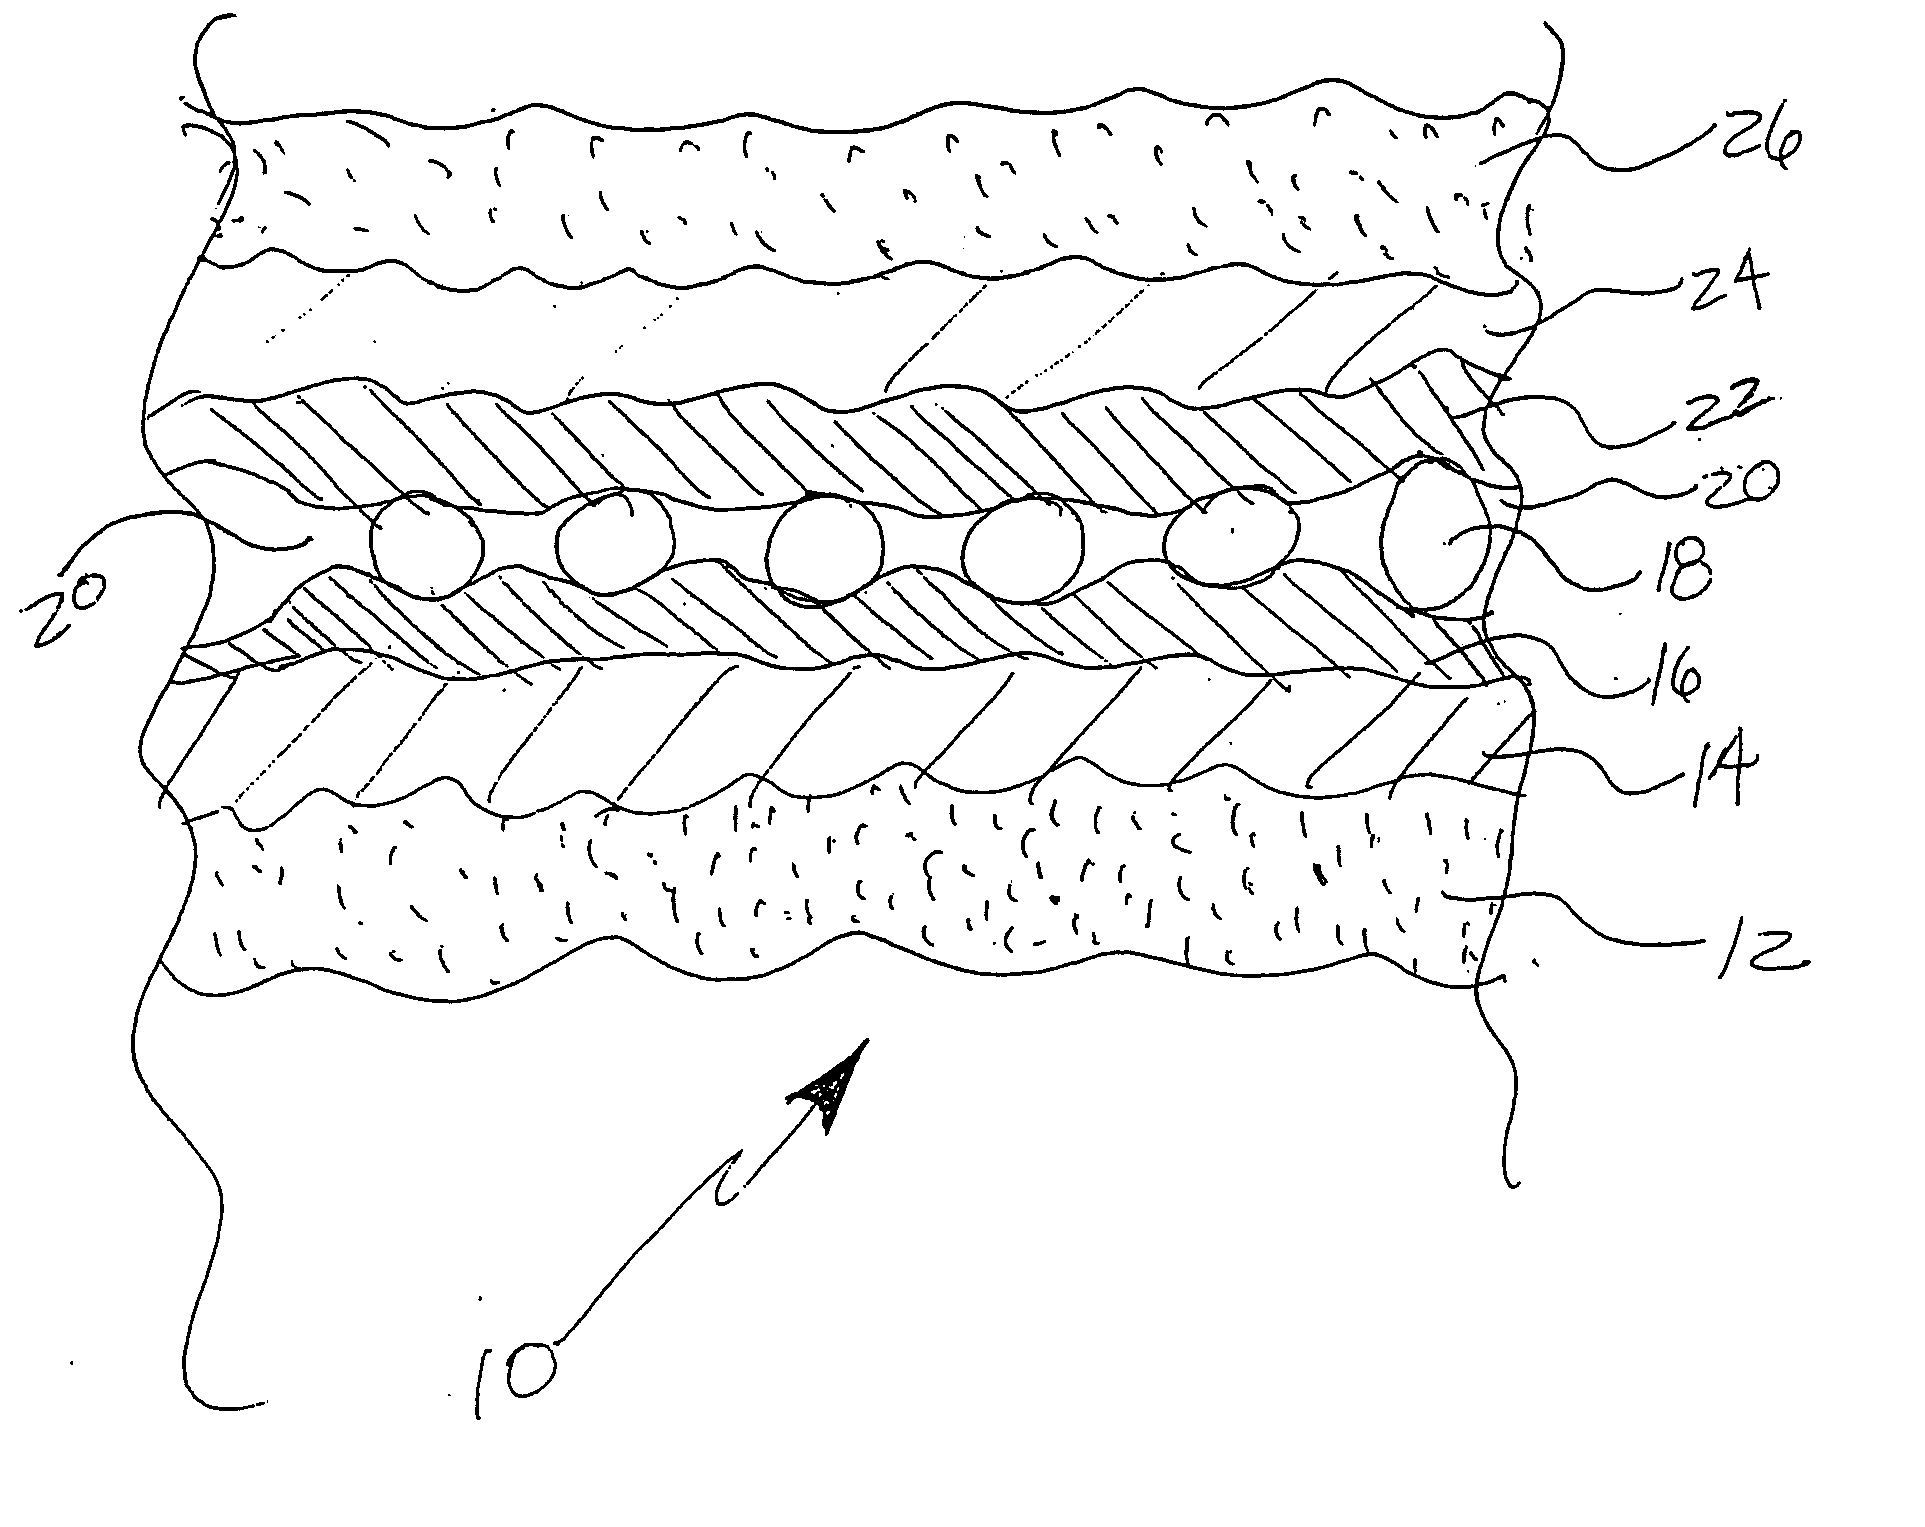 Multi-layer structure for supporting dispersed super absorbent polymeric material